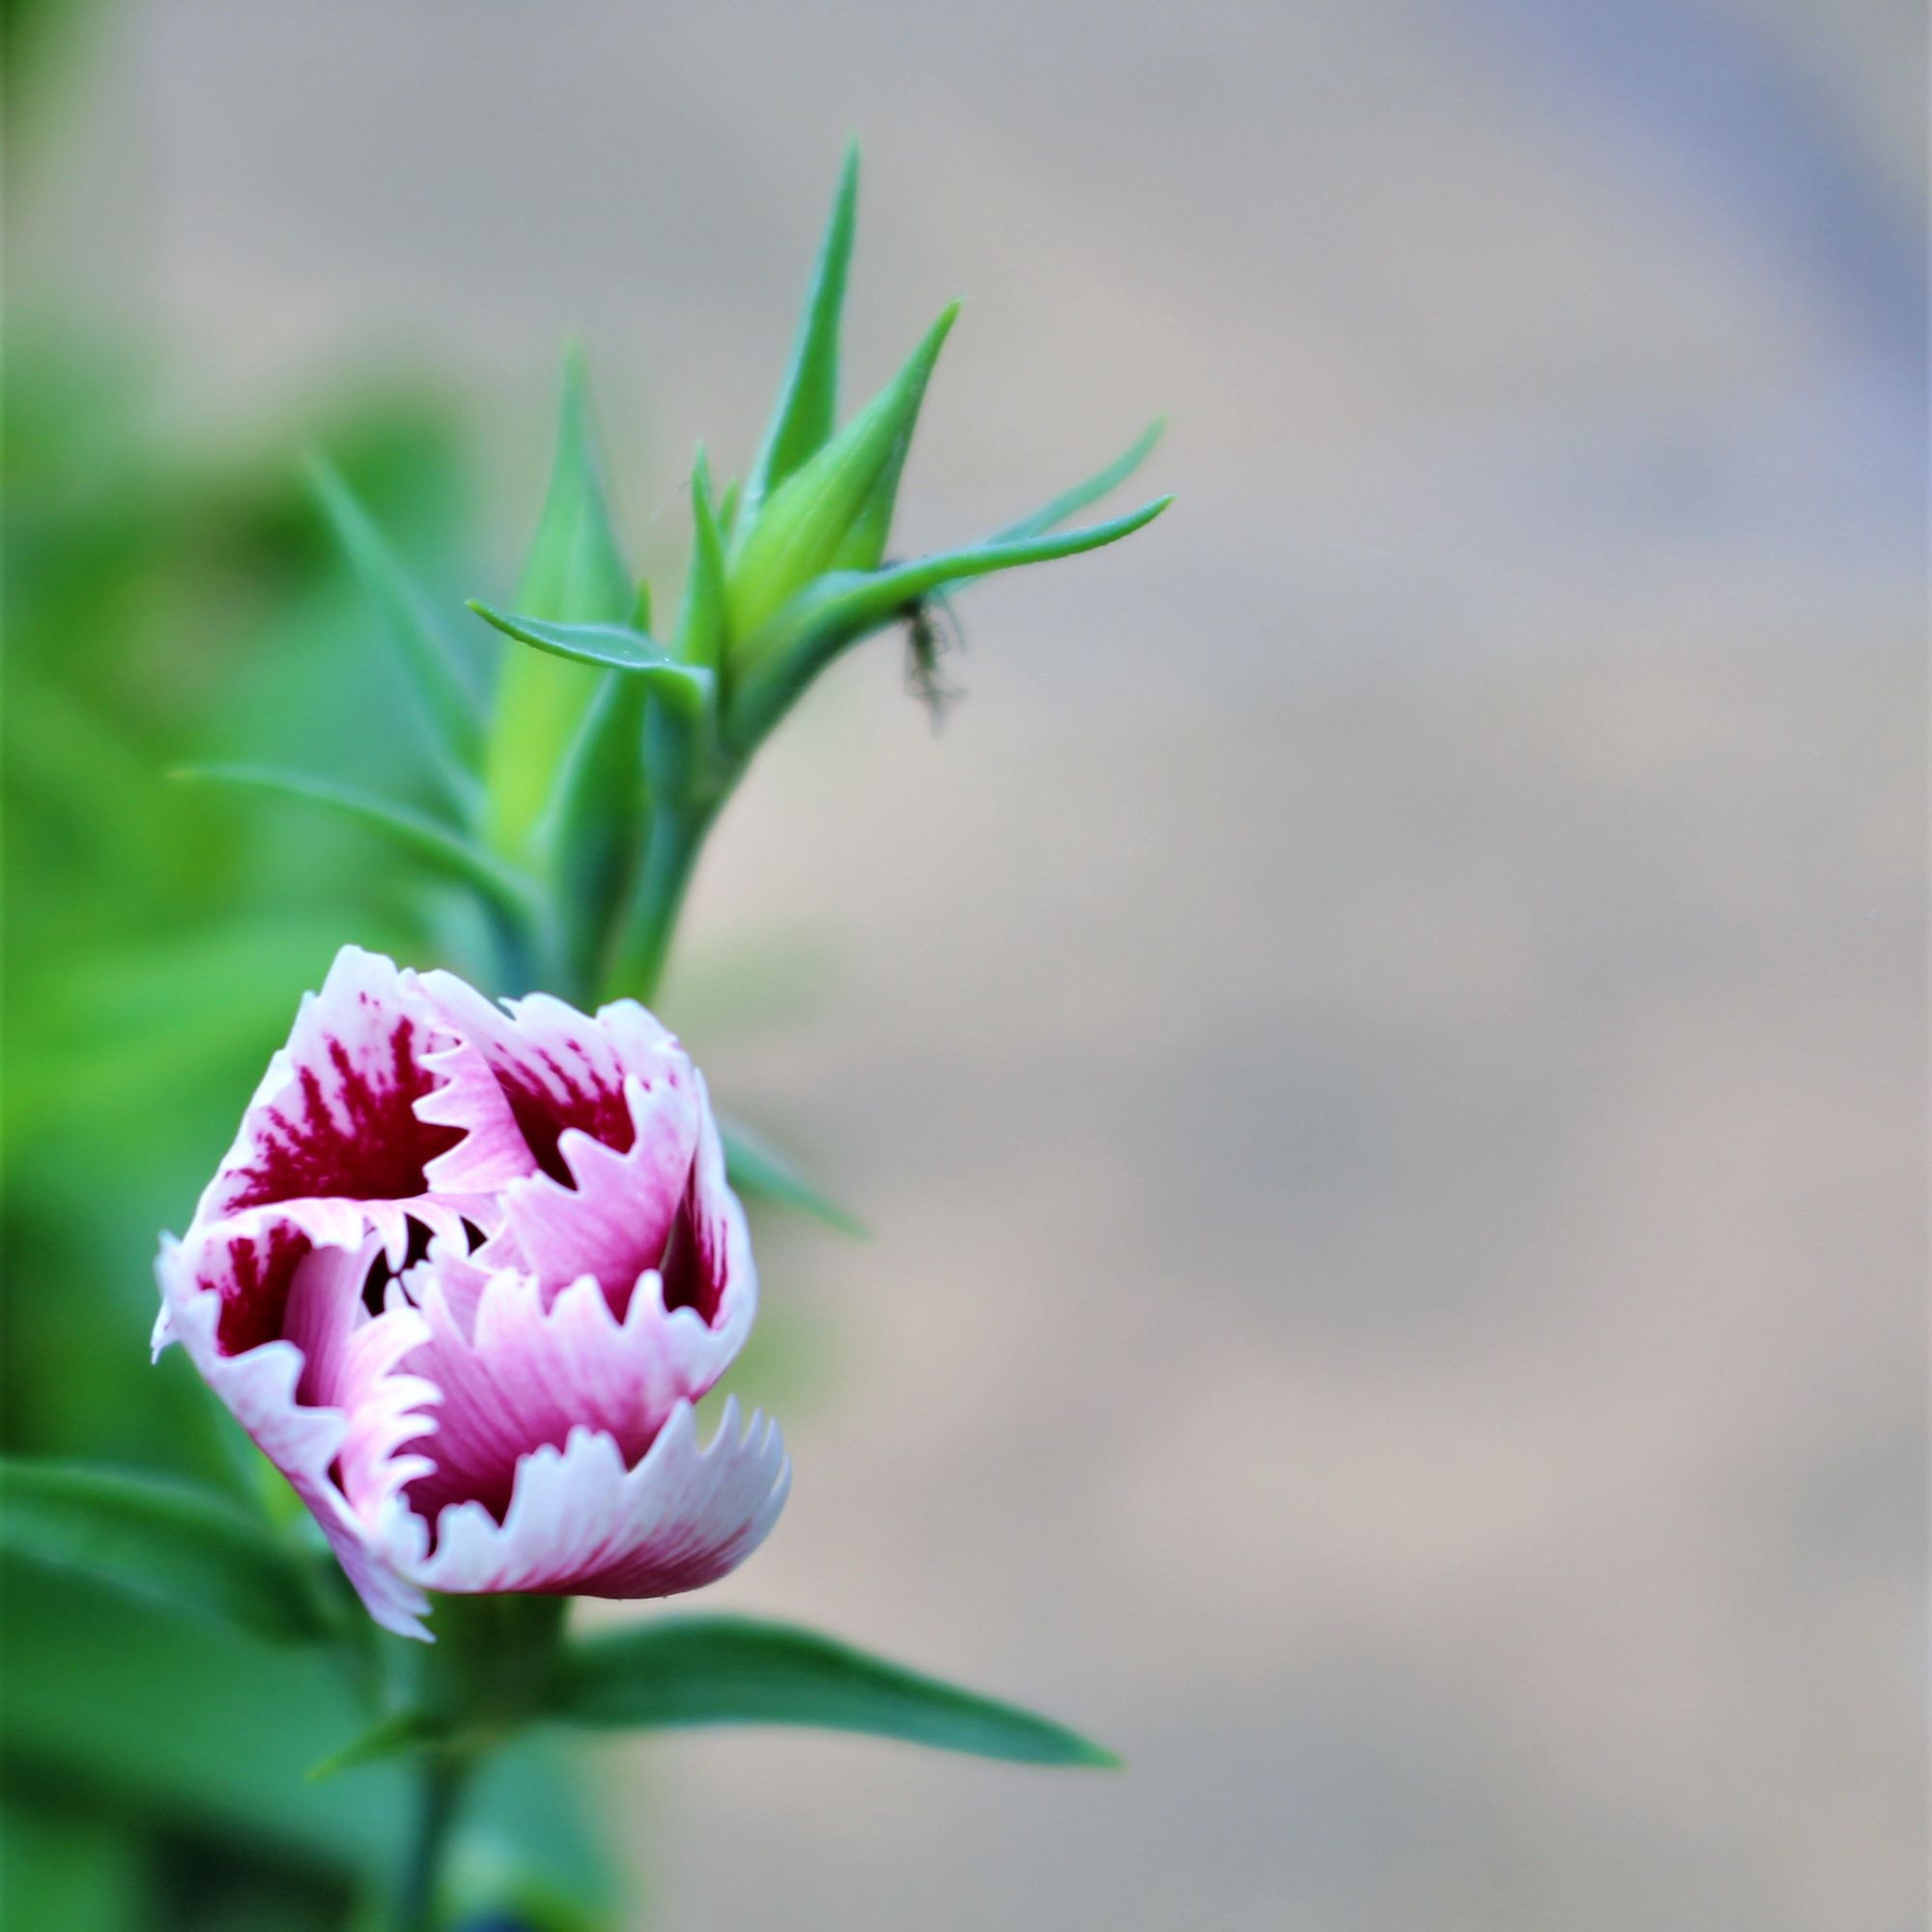 photo of  pink flower bud